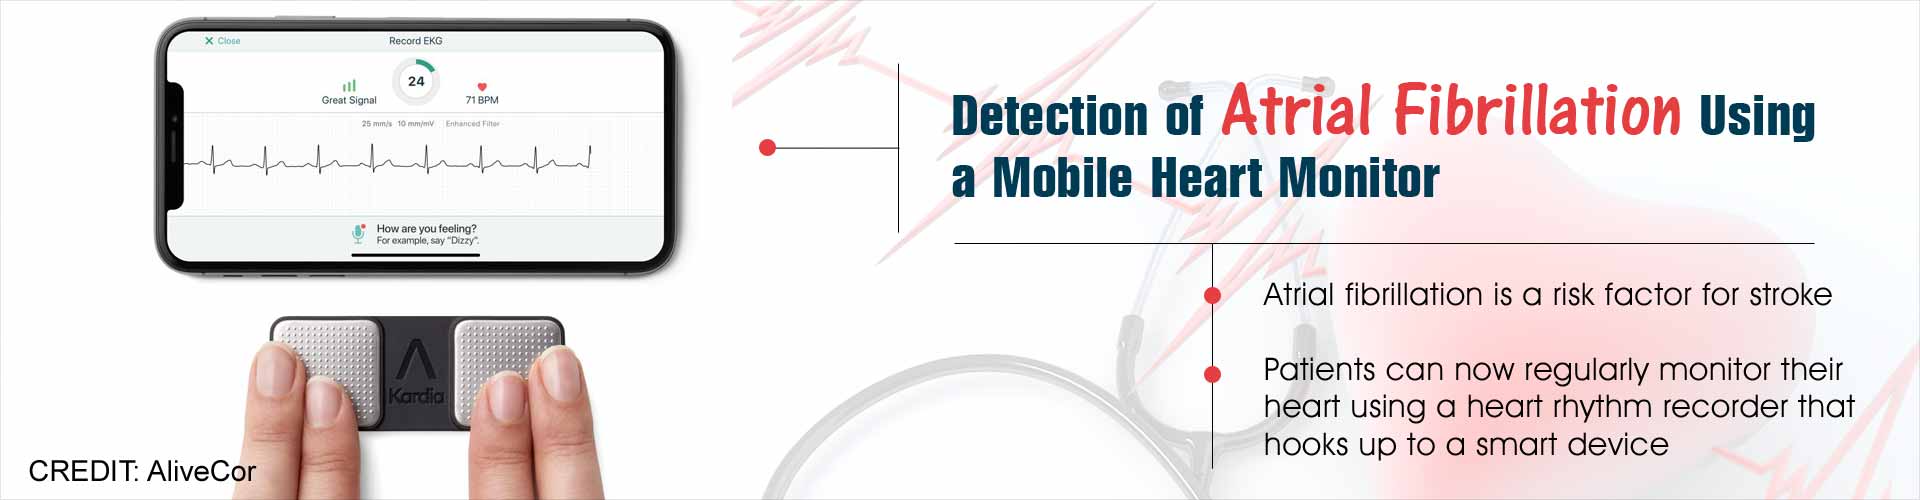 Detection of atrial fibrillation using a mobile heart monitor. Atrial fibrillation is a risk factor for stroke. Patients can now regularly monitor their heart using a heart rhythm recorder that hooks up to a smart device.
